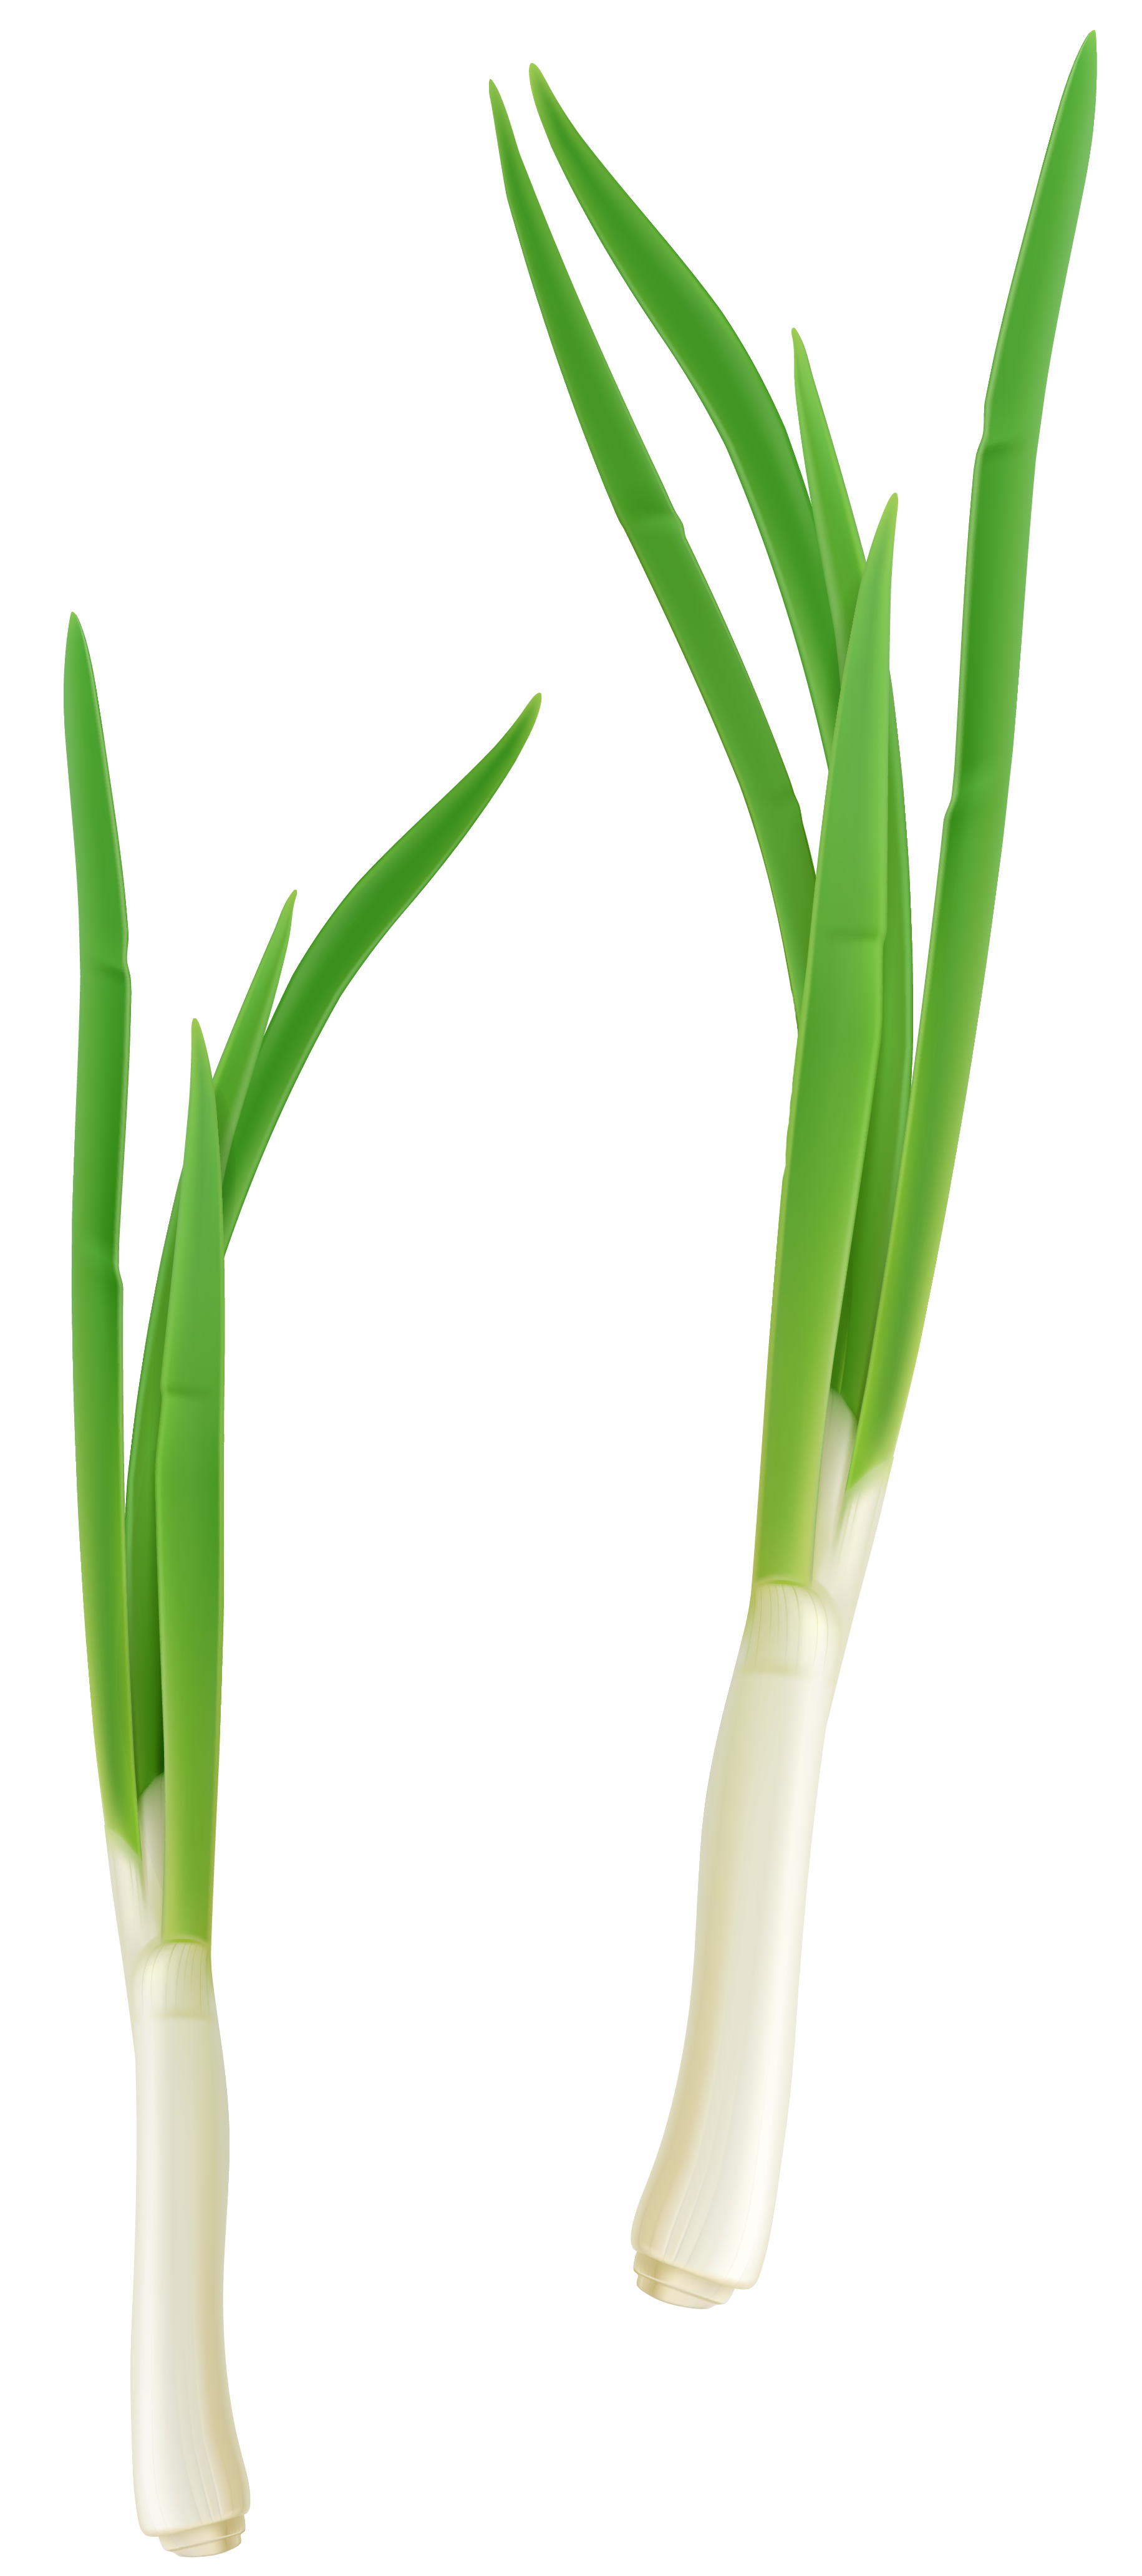 Clipart vegetables name. Green fresh onion png